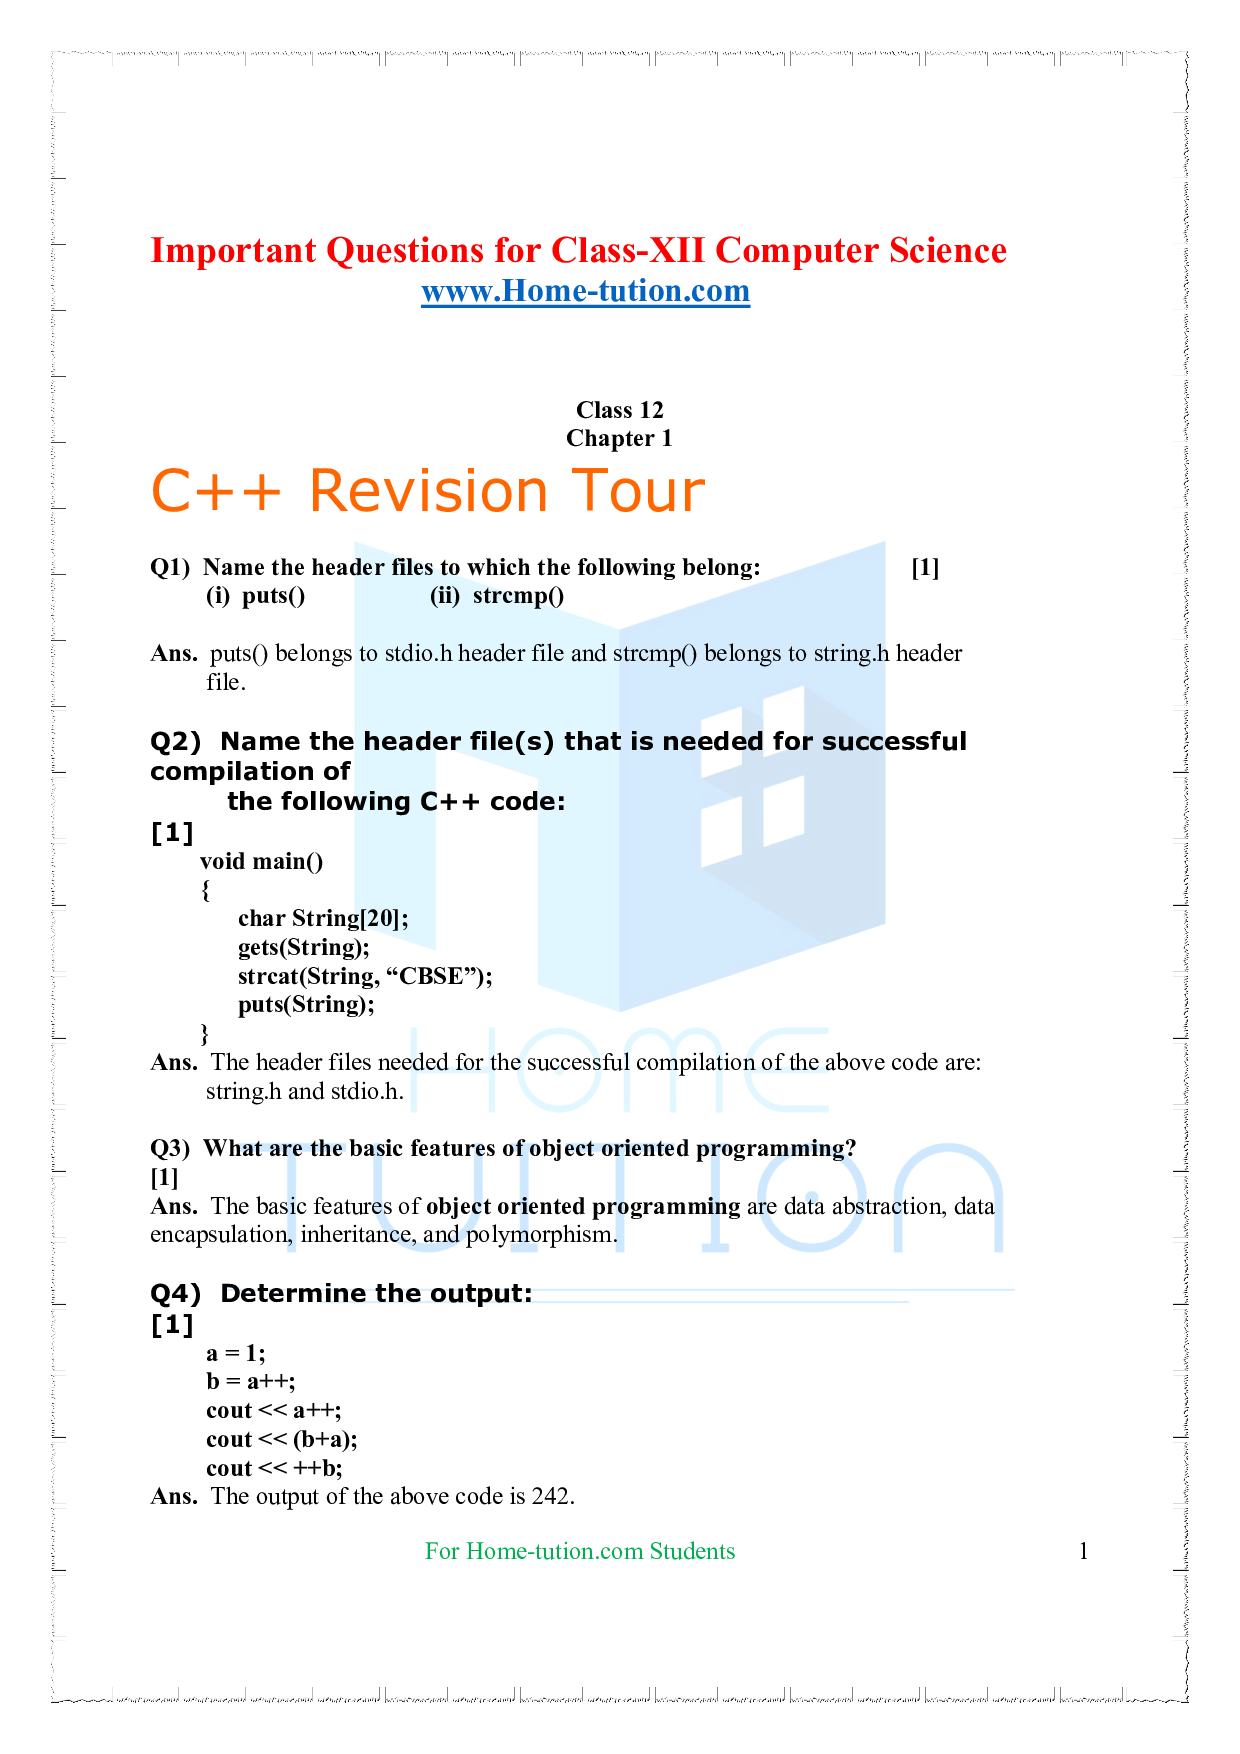 CBSE Questions for Chapter-C++ Revision Tour